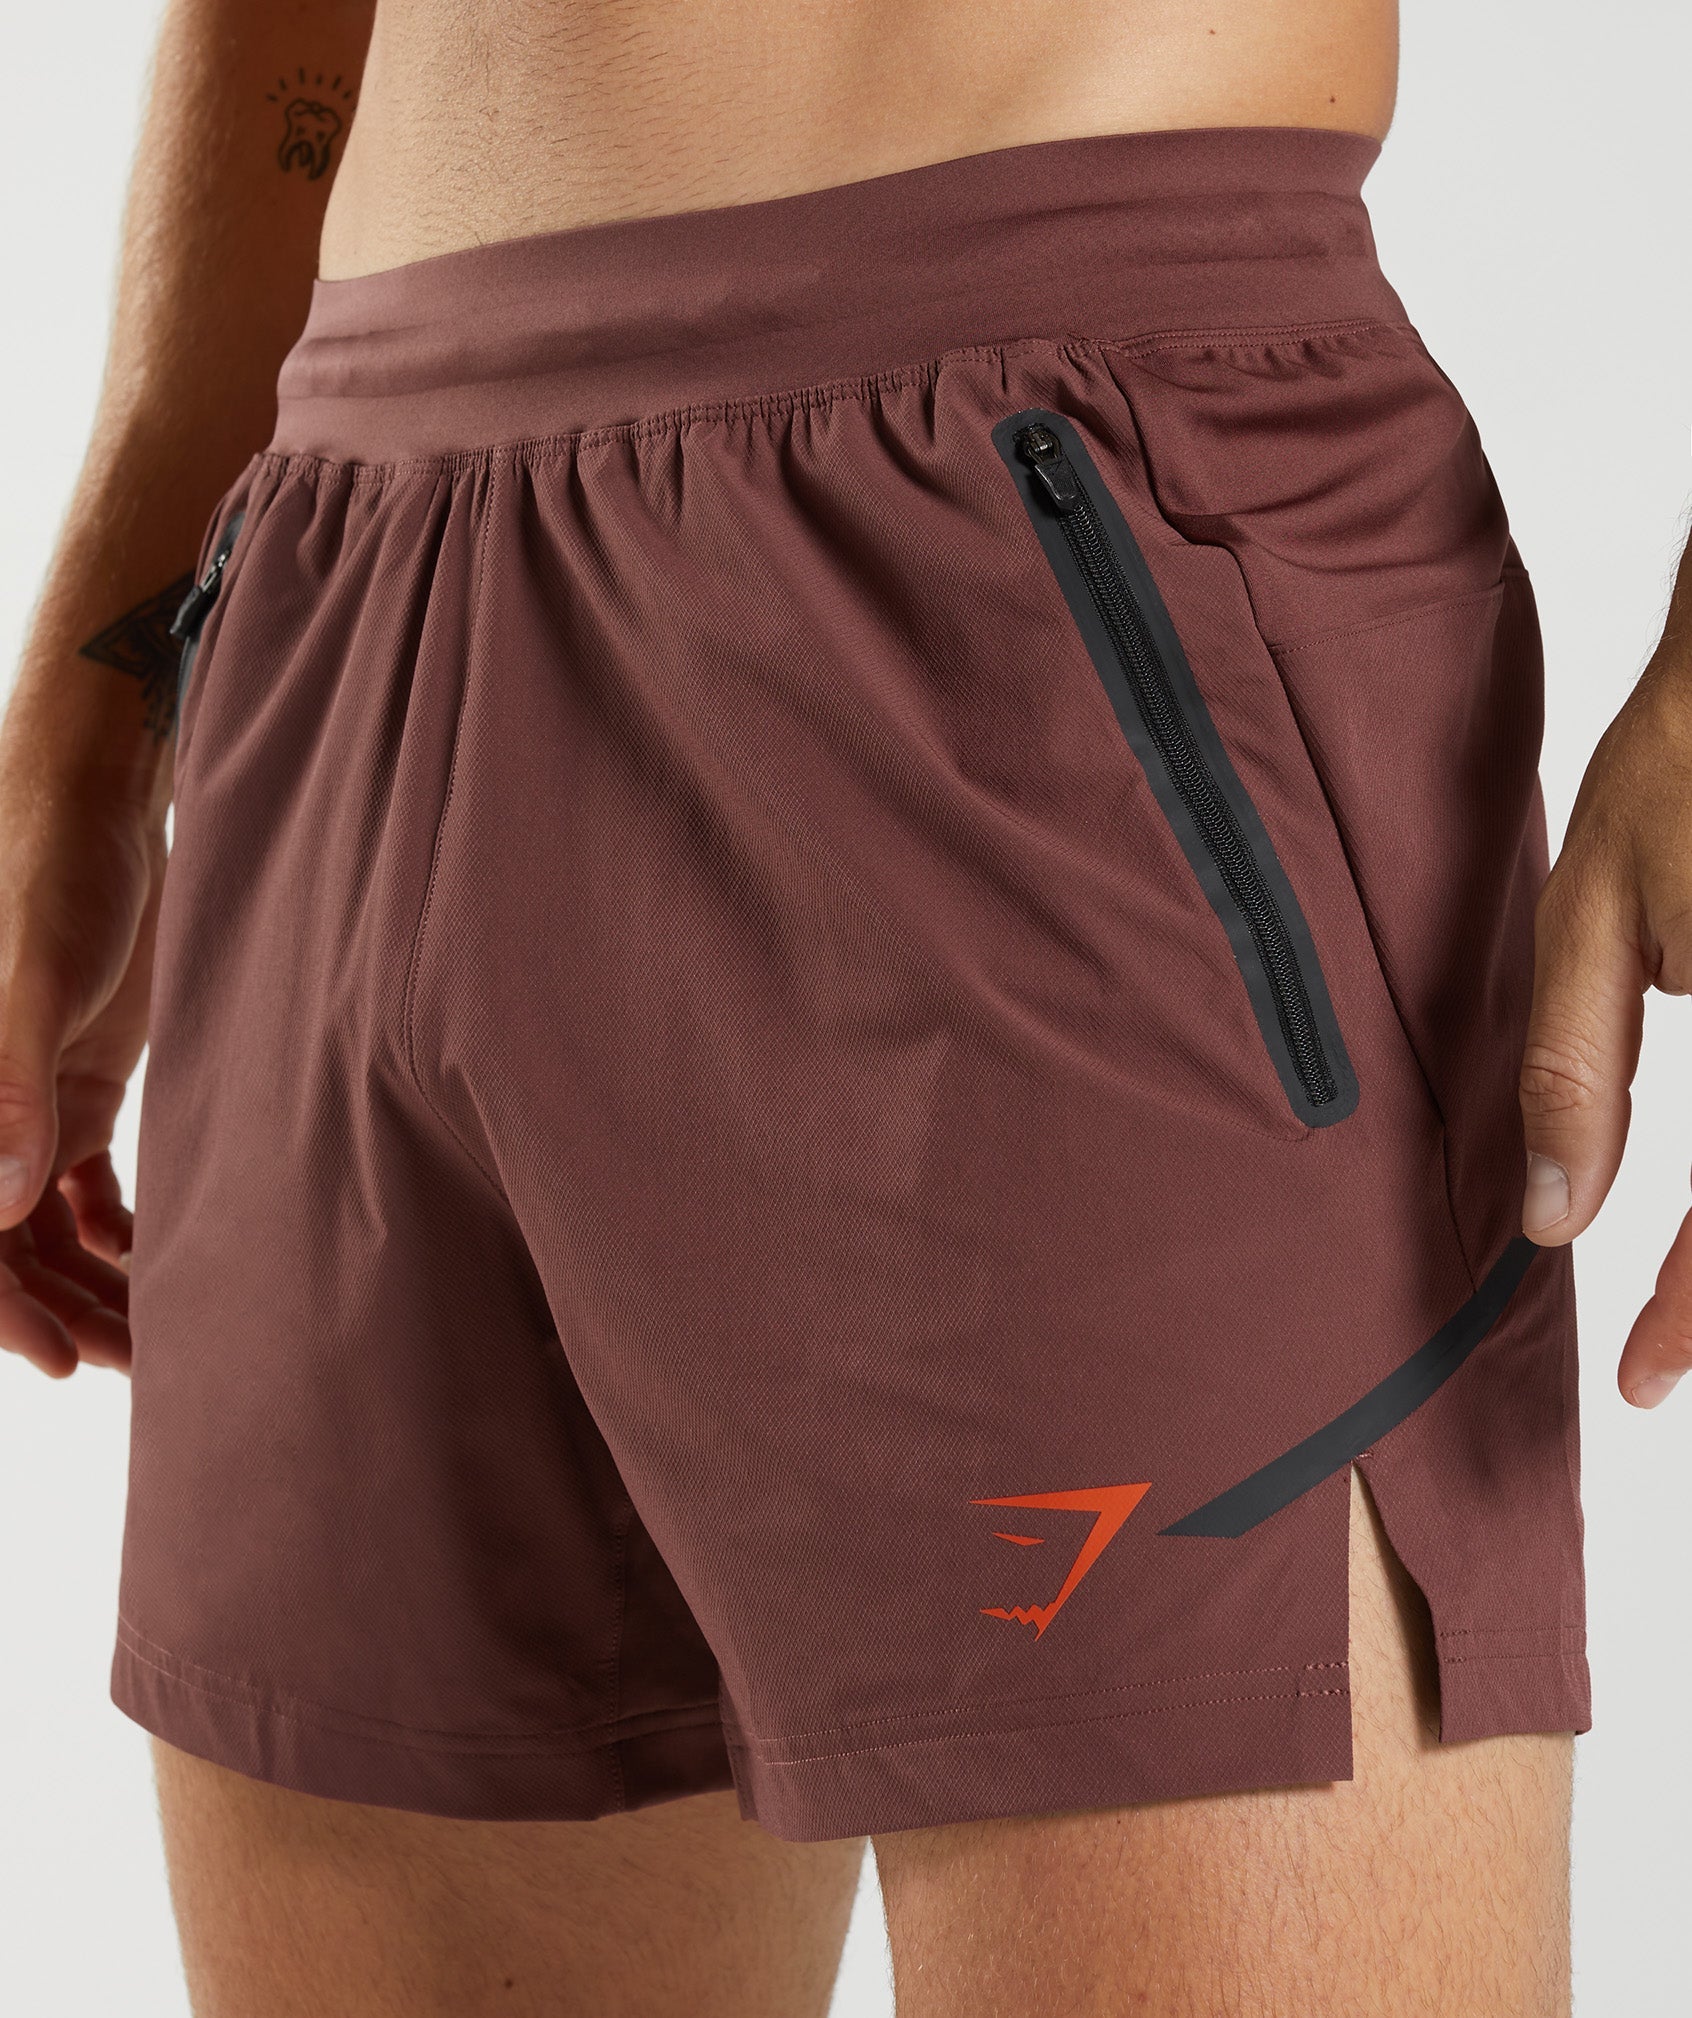 Apex 5" Perform Shorts in Cherry Brown - view 5